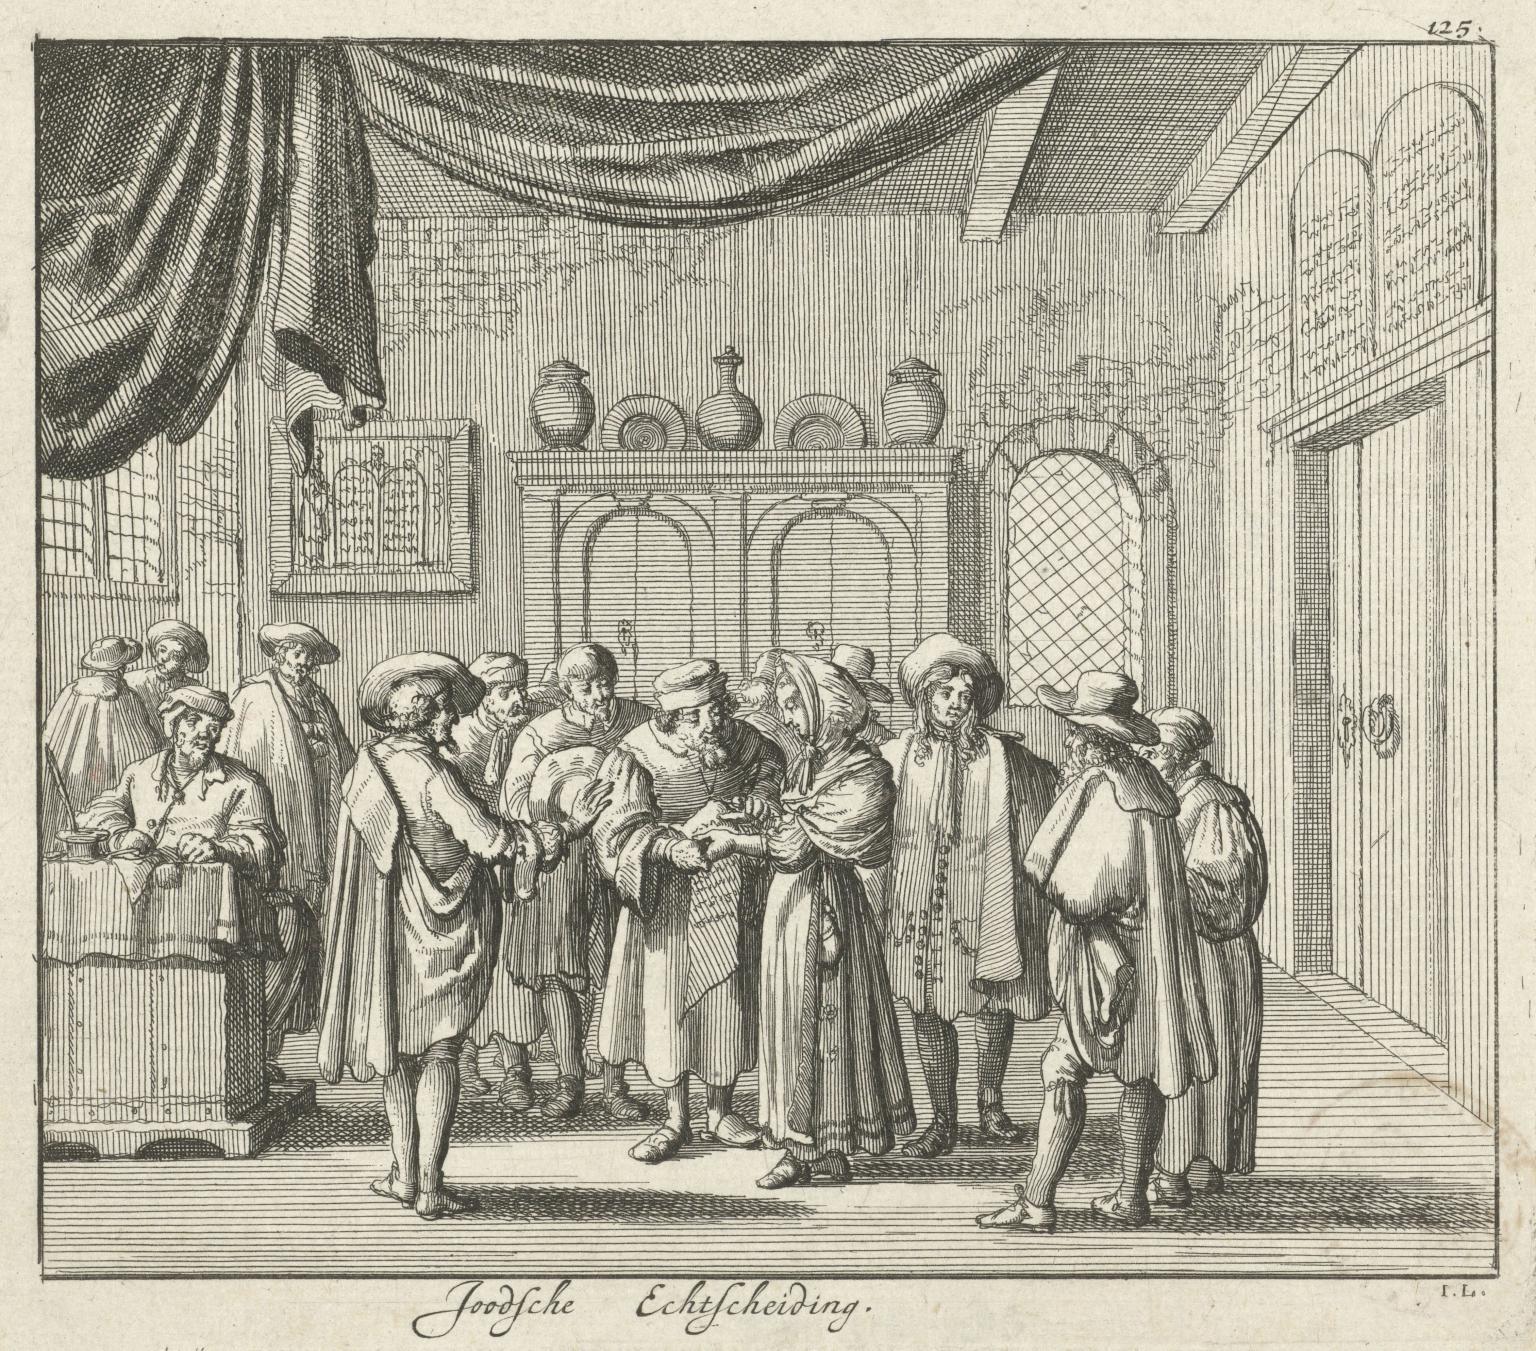 Print image of men and one woman in room, next to man sitting at raised desk. 